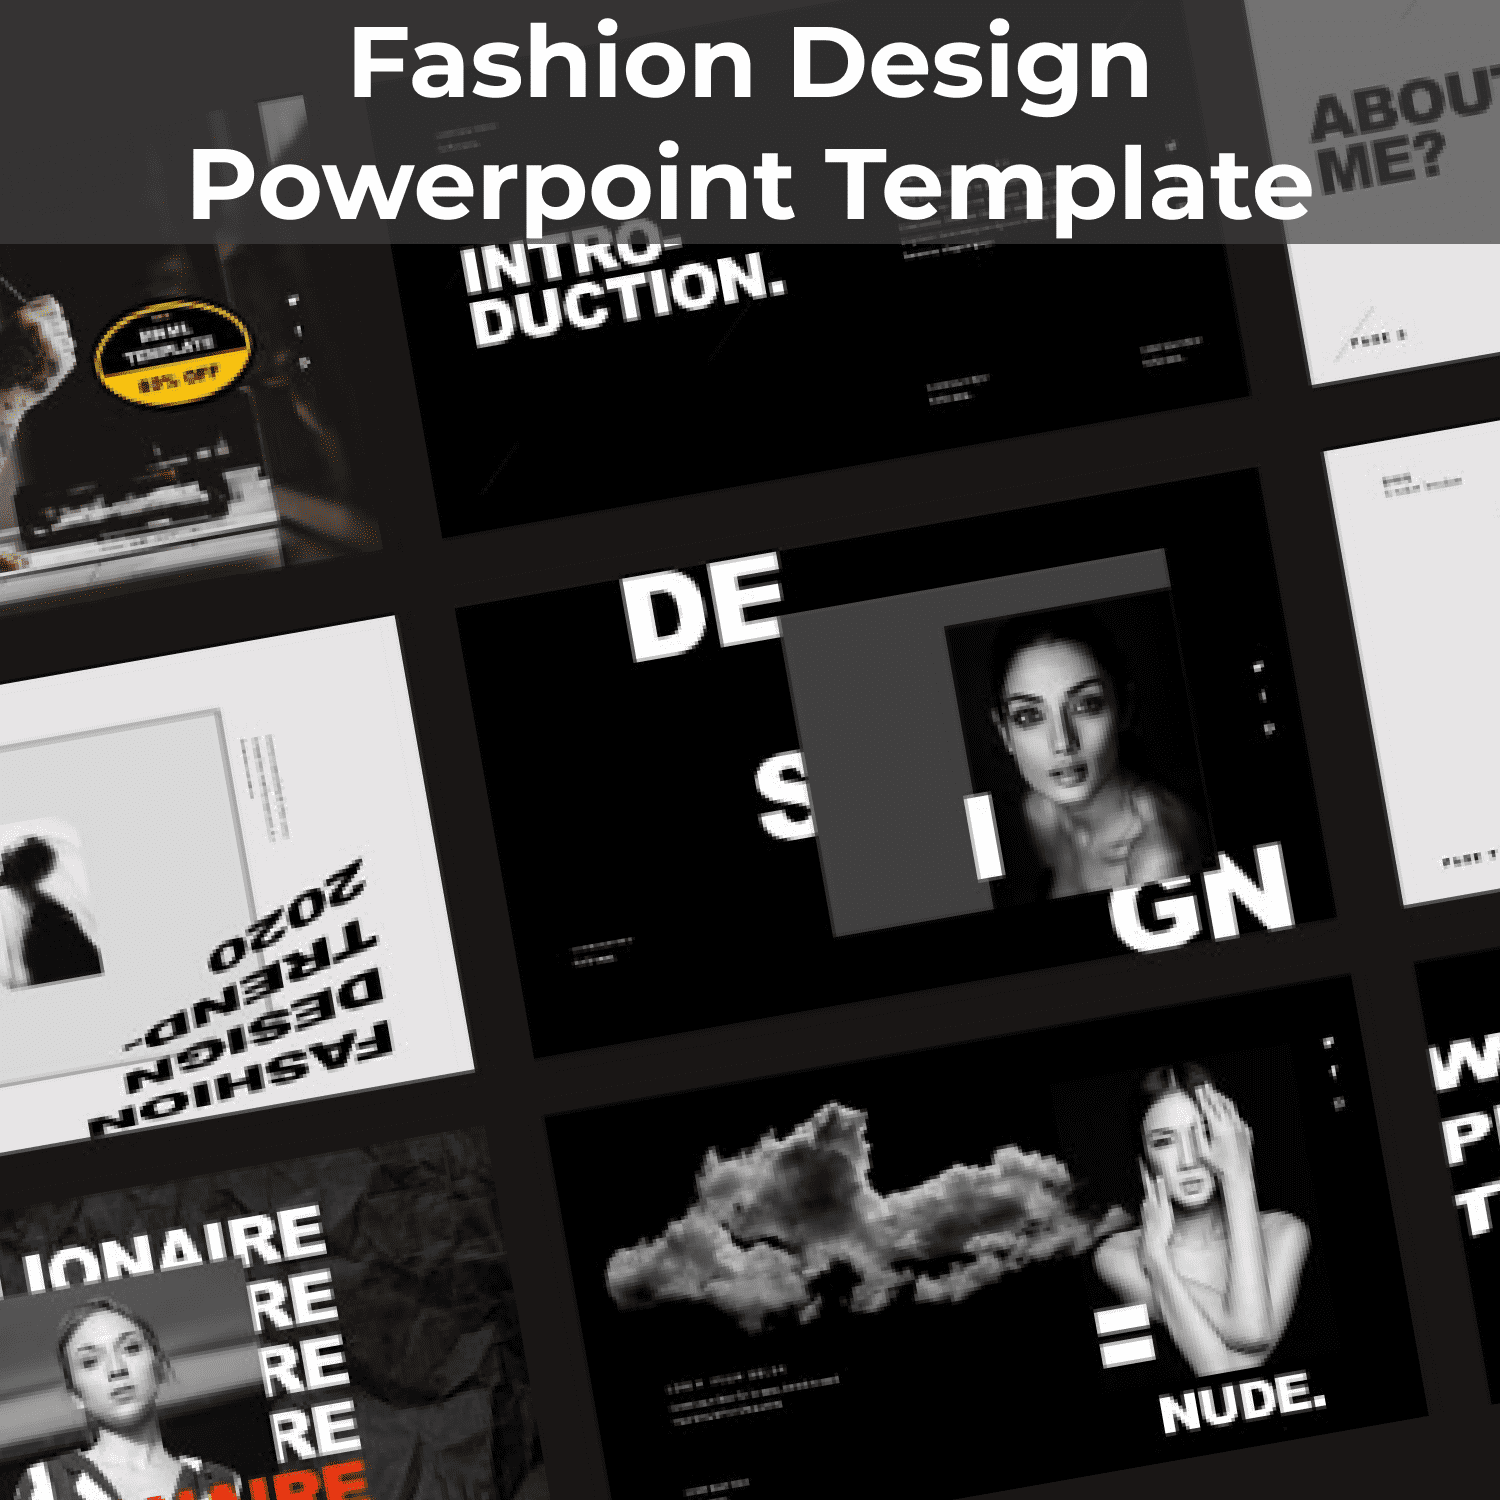 Fashion Design Powerpoint Template cover image.